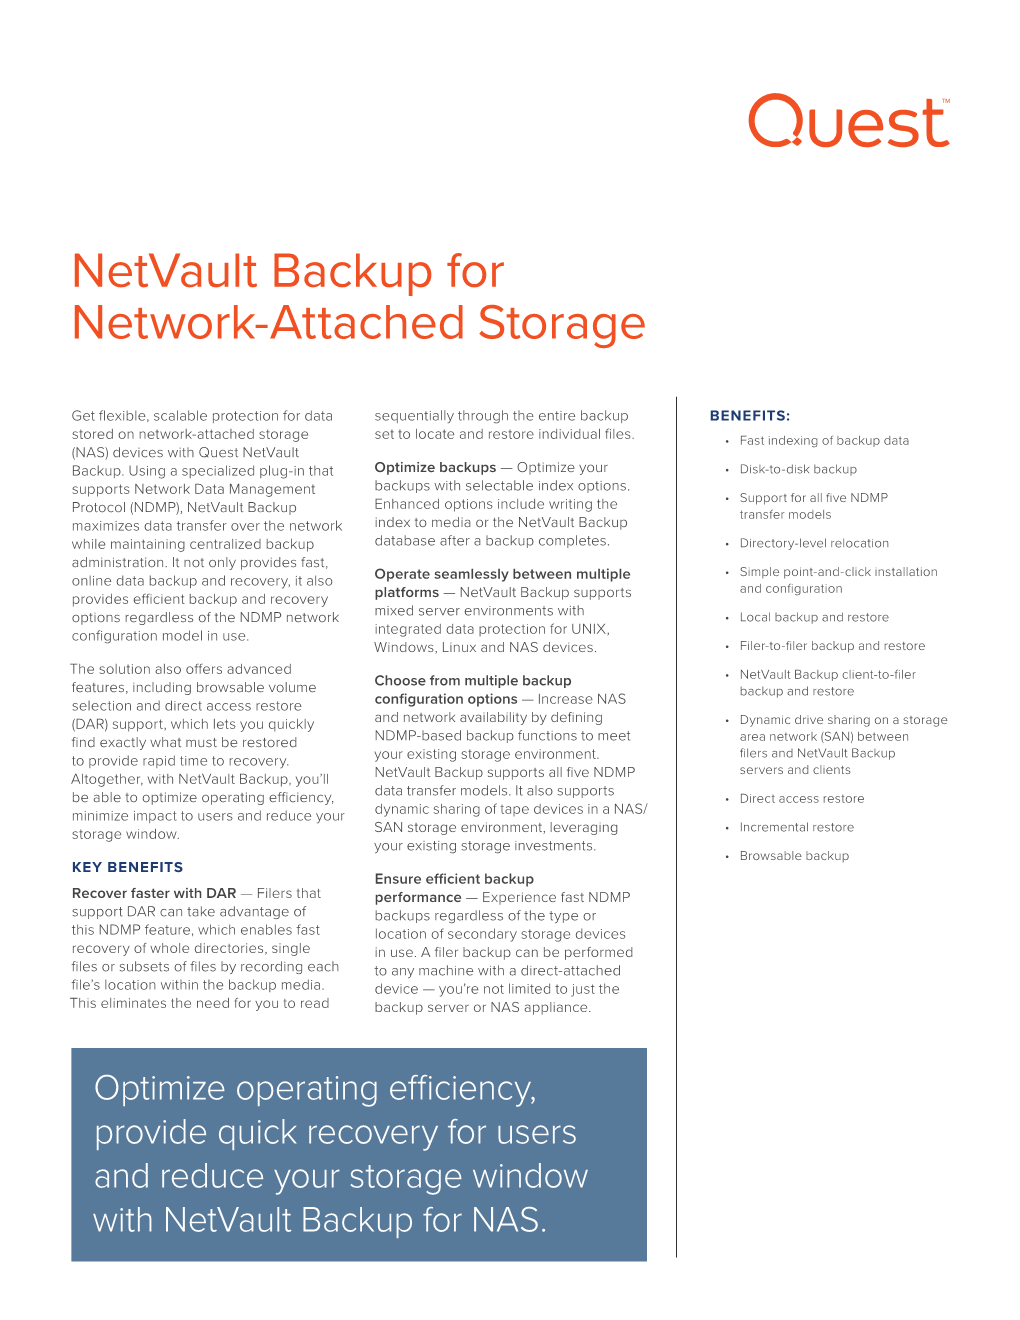 Netvault Backup for Network-Attached Storage